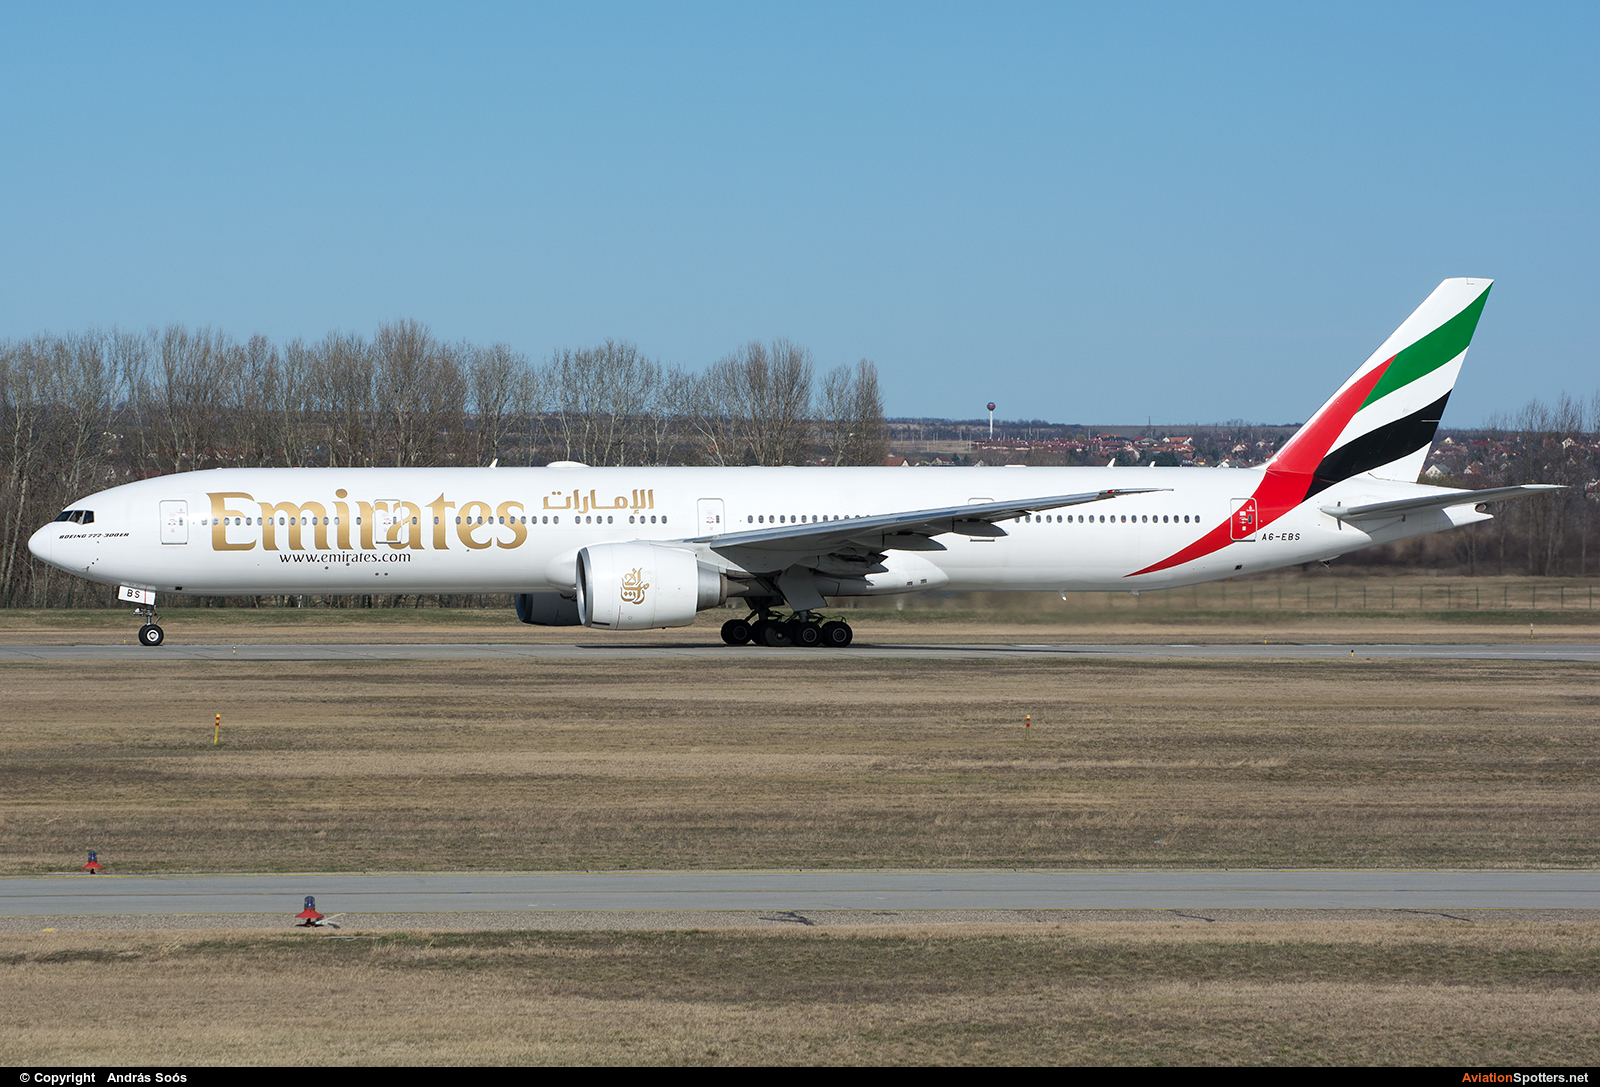 Emirates Airlines  -  777-300ER  (A6-EBS) By András Soós (sas1965)